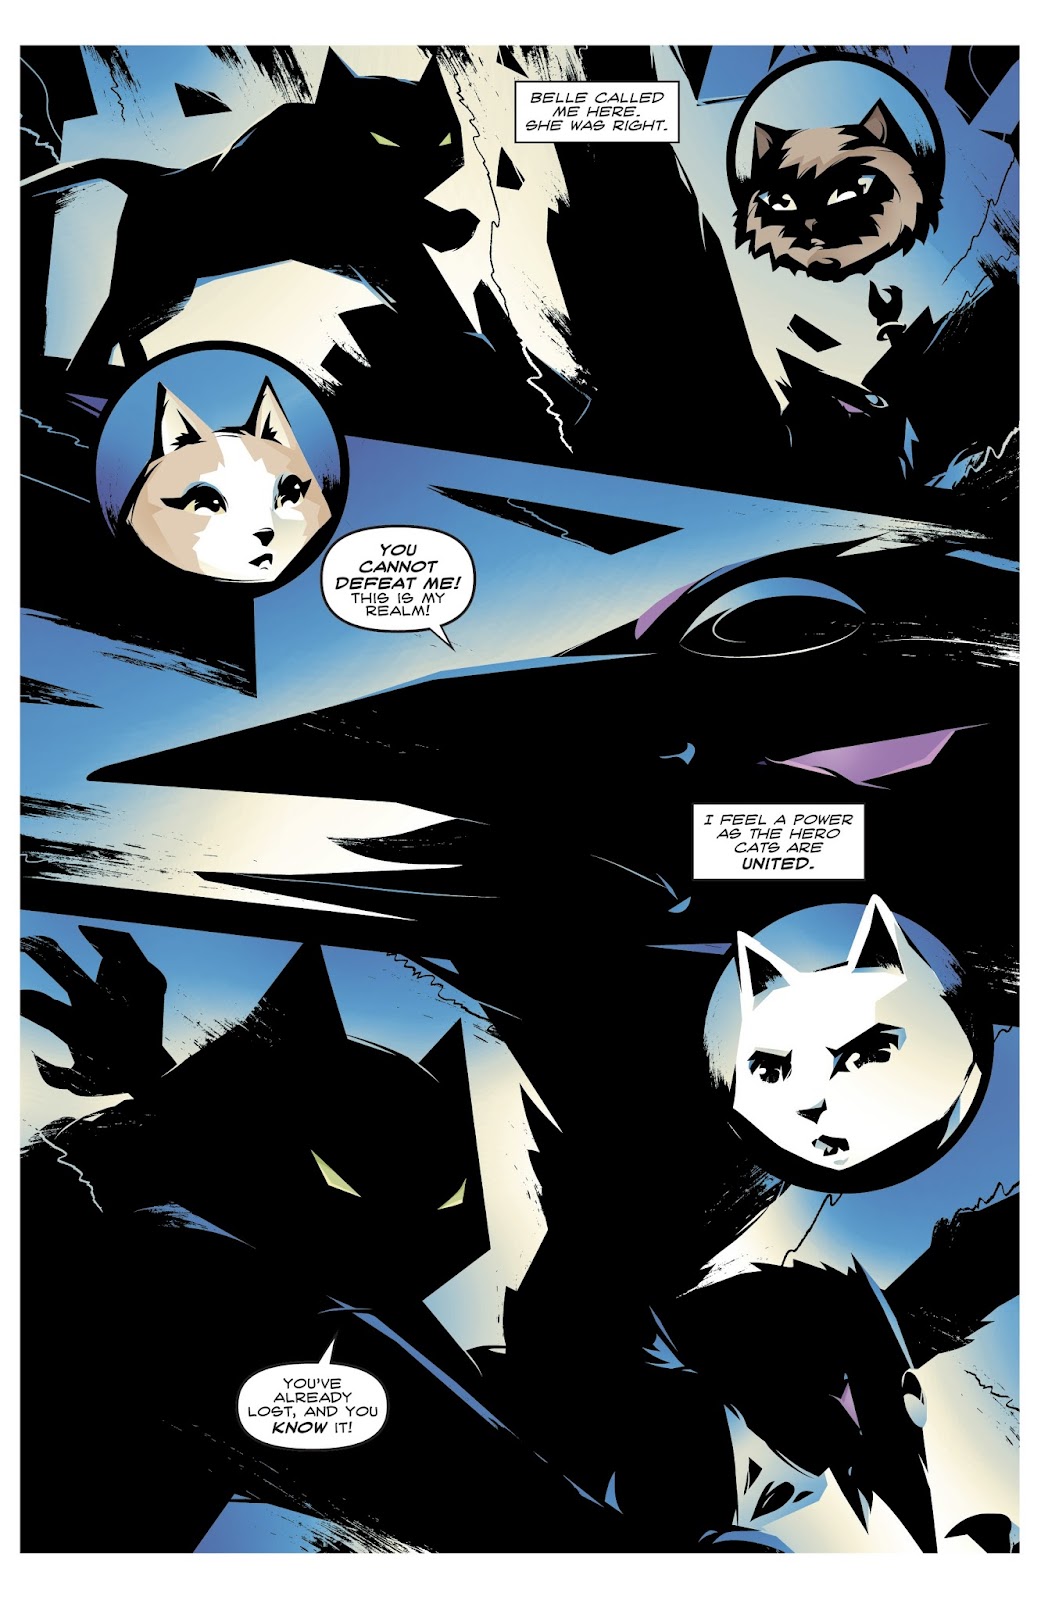 Hero Cats: Midnight Over Stellar City Vol. 2 issue 3 - Page 4